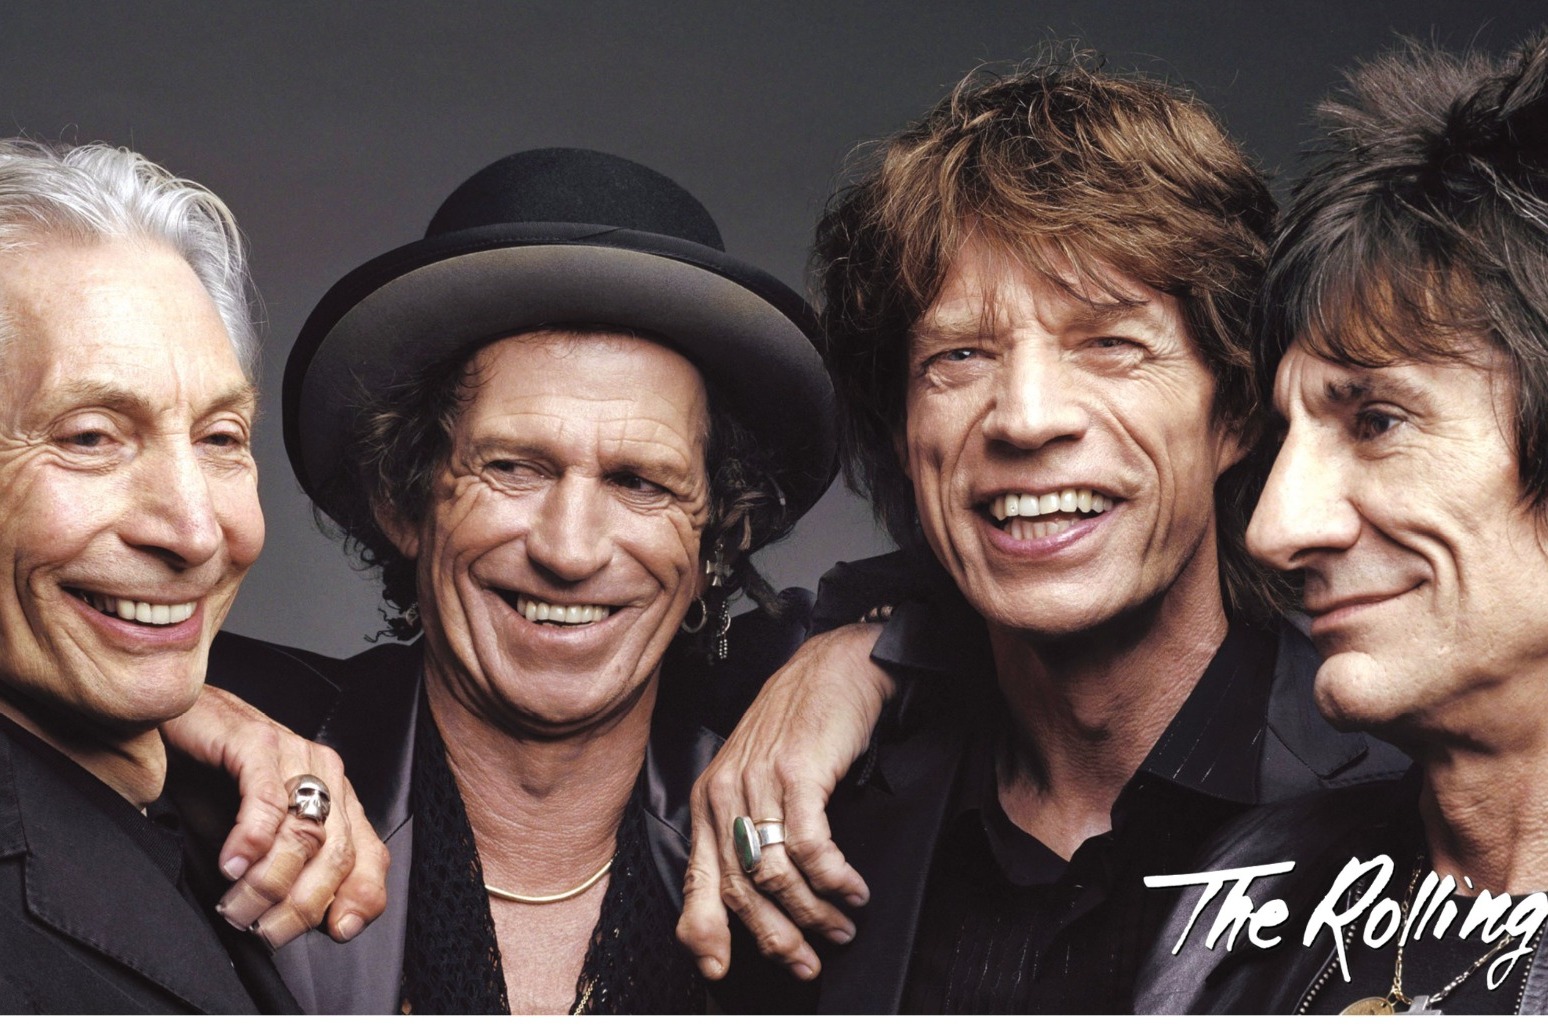 Keith Richards says Rolling Stones hiatus was ‘necessary’ and made him stronger 